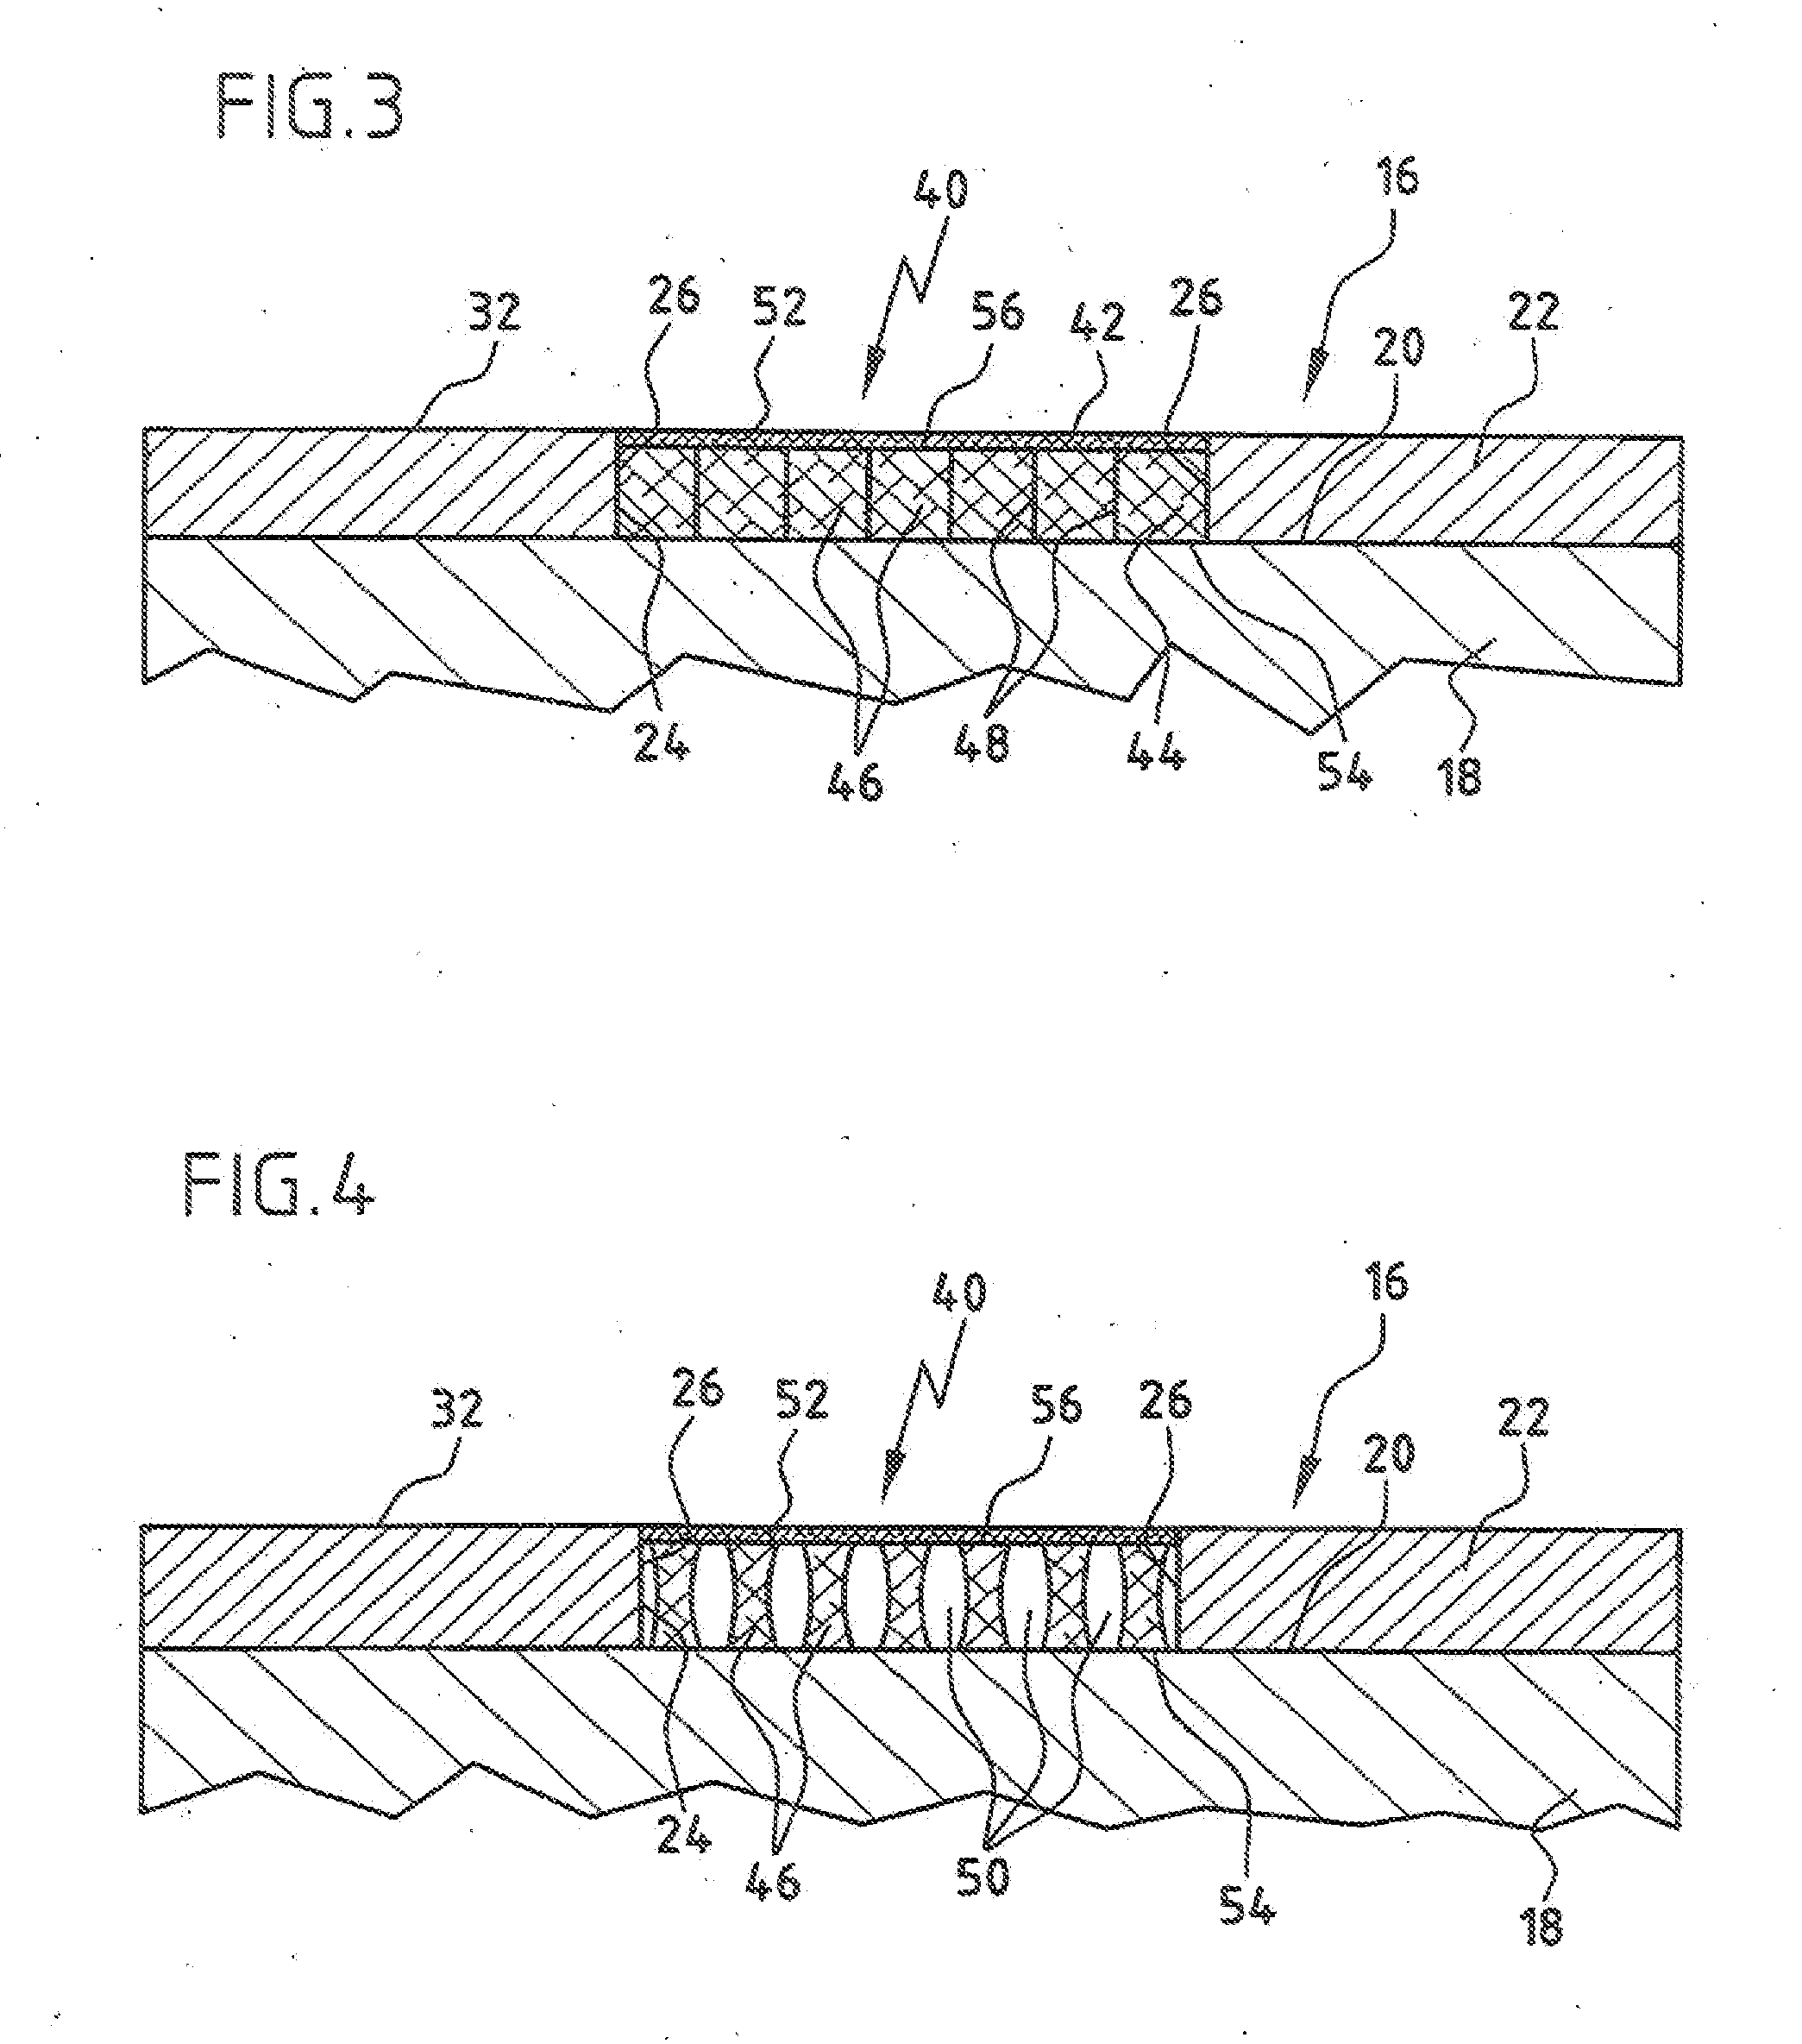 Cartilage replacement implant and method for producing a cartilage replacement implant